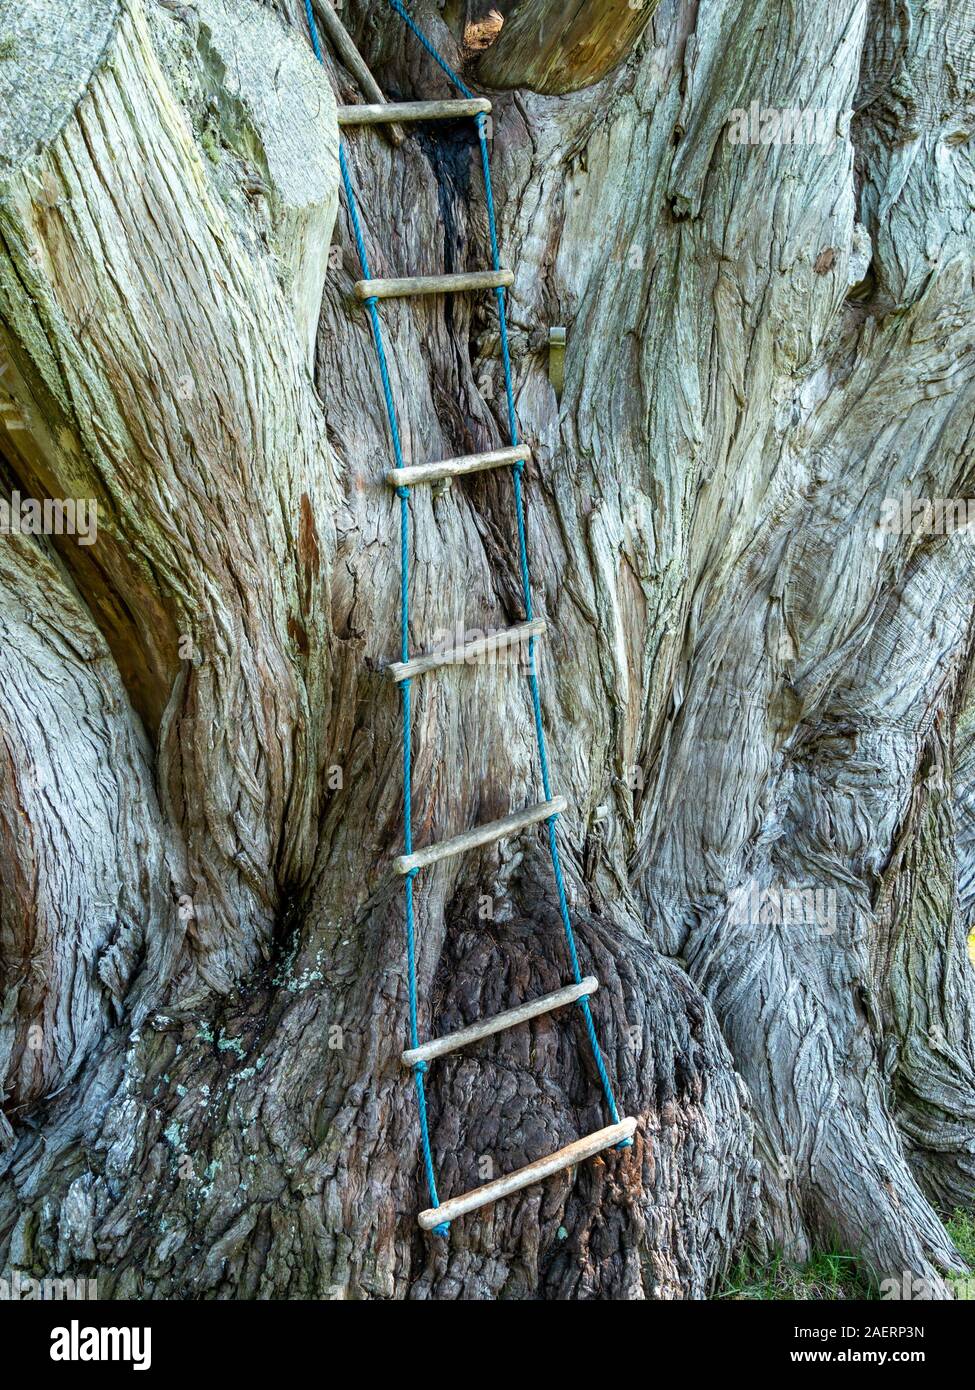 Rope ladder for climbing up trunk of huge Monterey Cypress tree in Colonsay House gardens, Isle of Colonsay, Scotland, UK Stock Photo